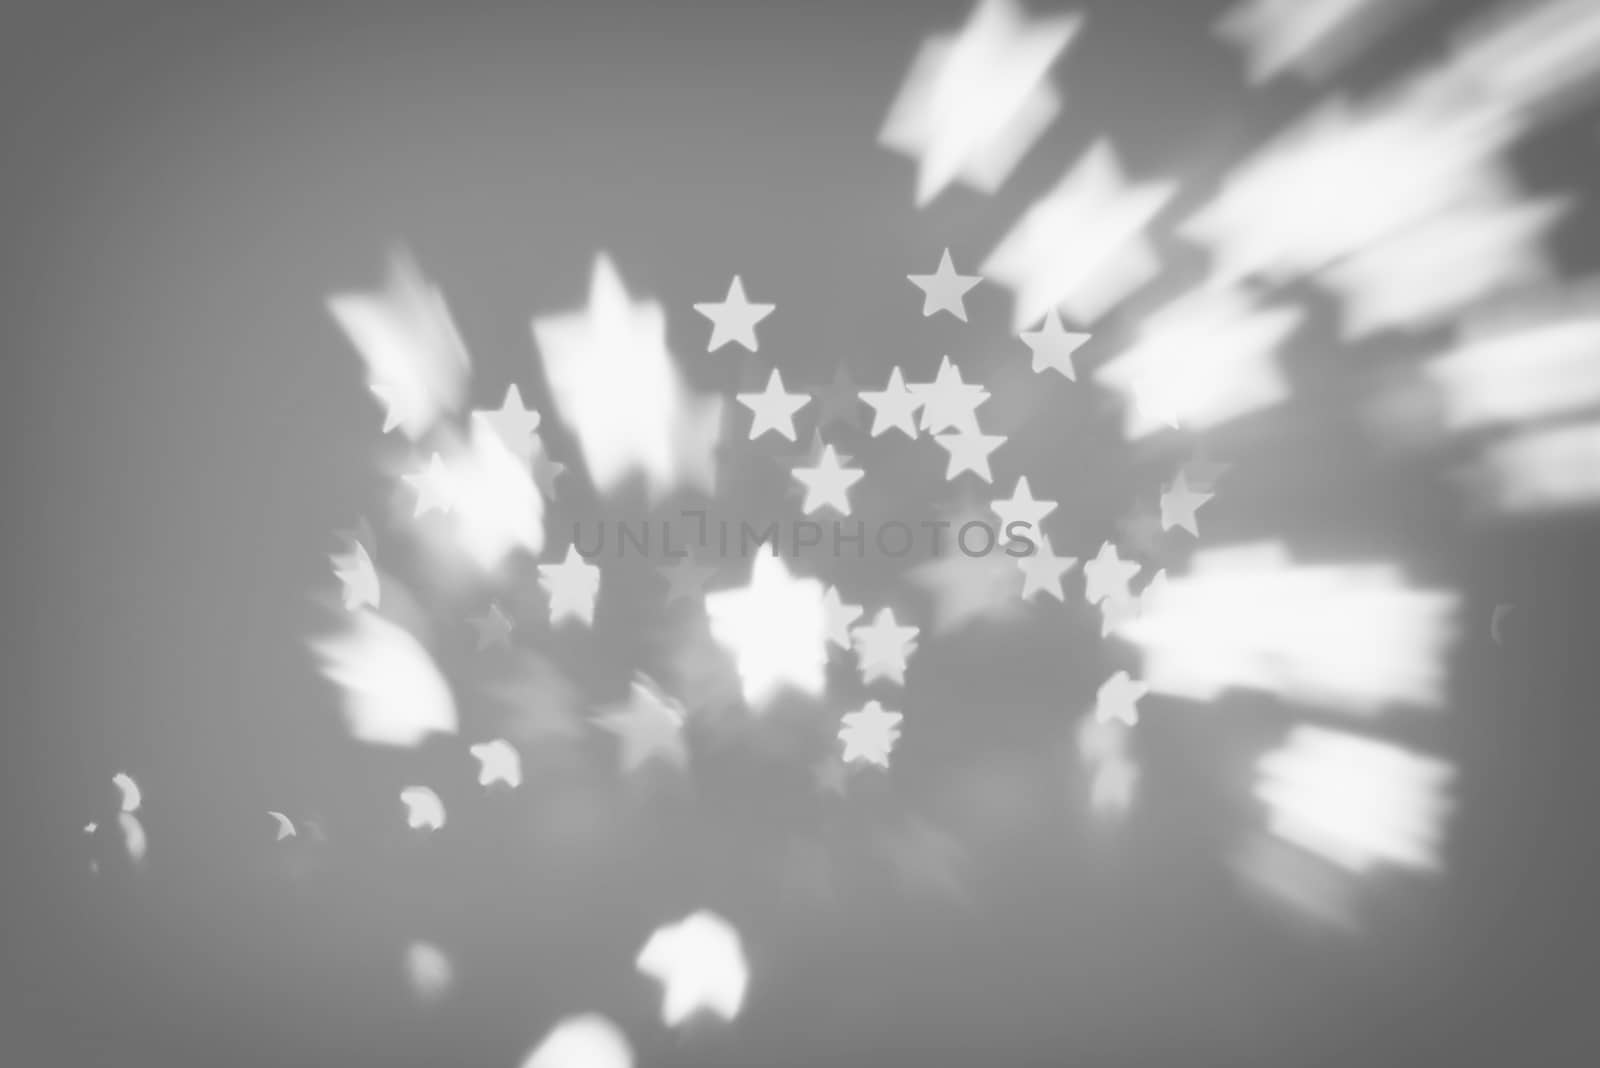 retro black and white stars in space (stars abstract blur background)